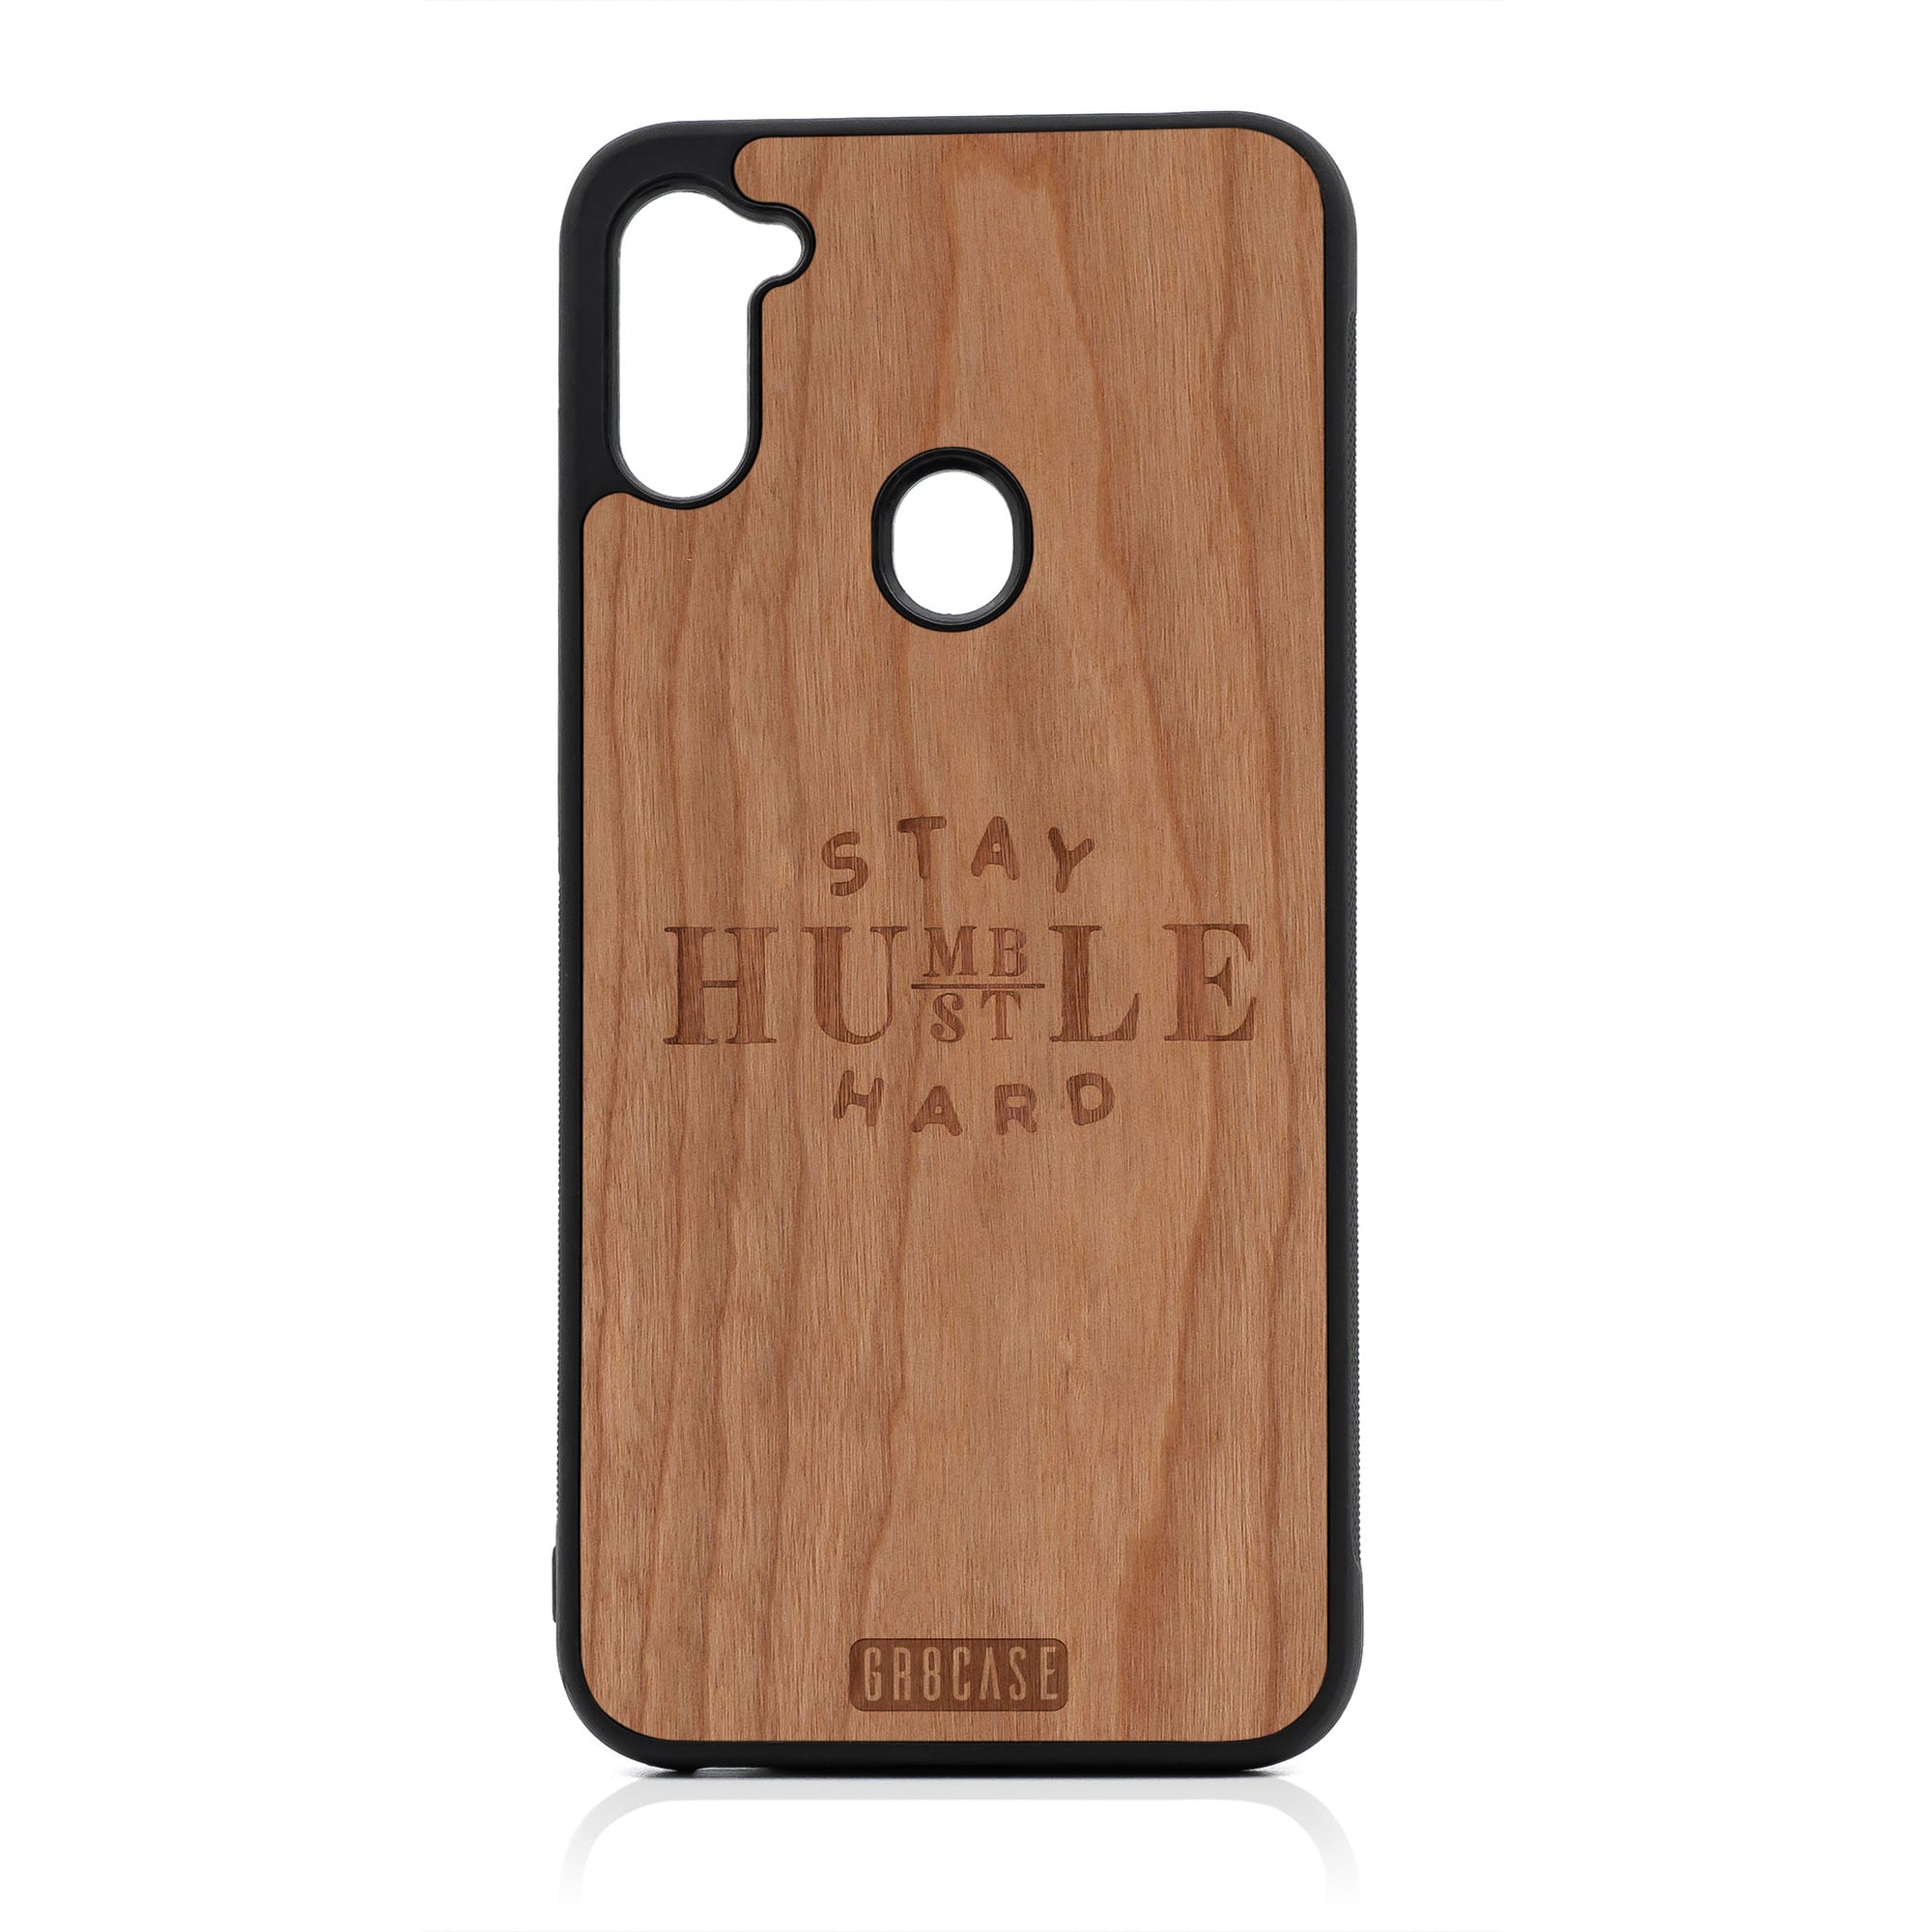 Stay Humble Hustle Hard Design Wood Case For Samsung Galaxy A11